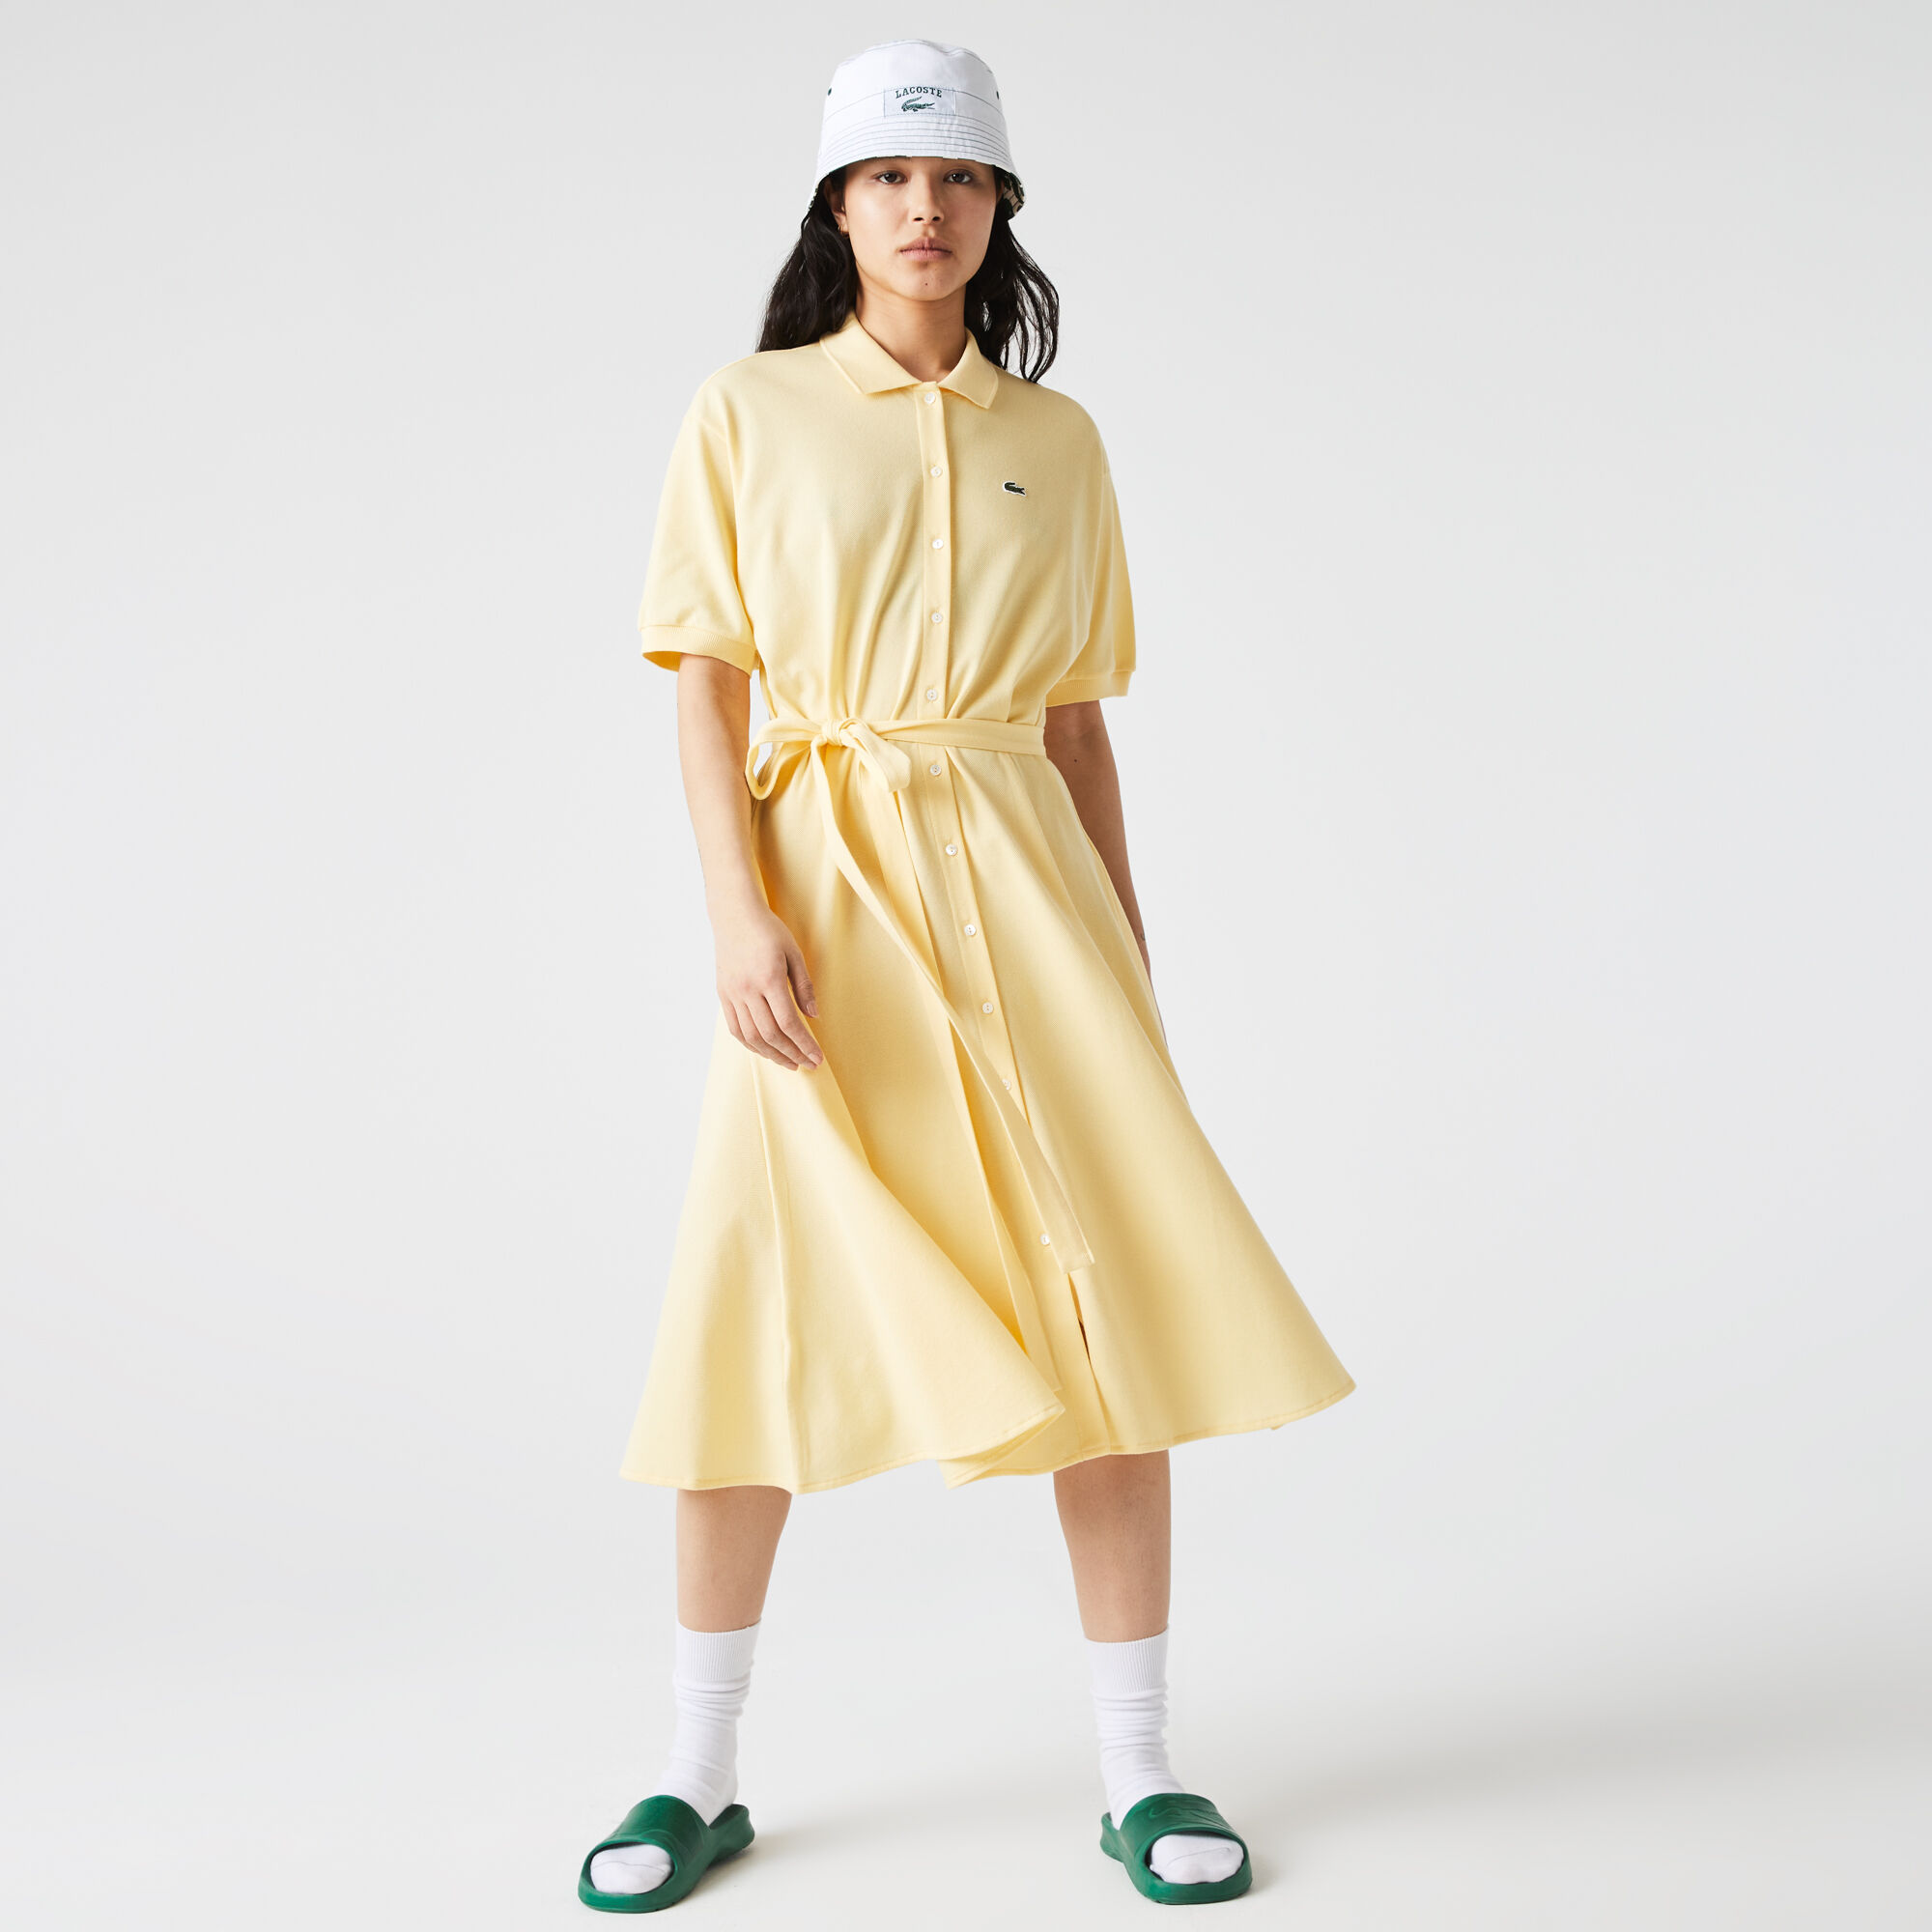 Clothing & Shoe collection | Women's Fashion | LACOSTE